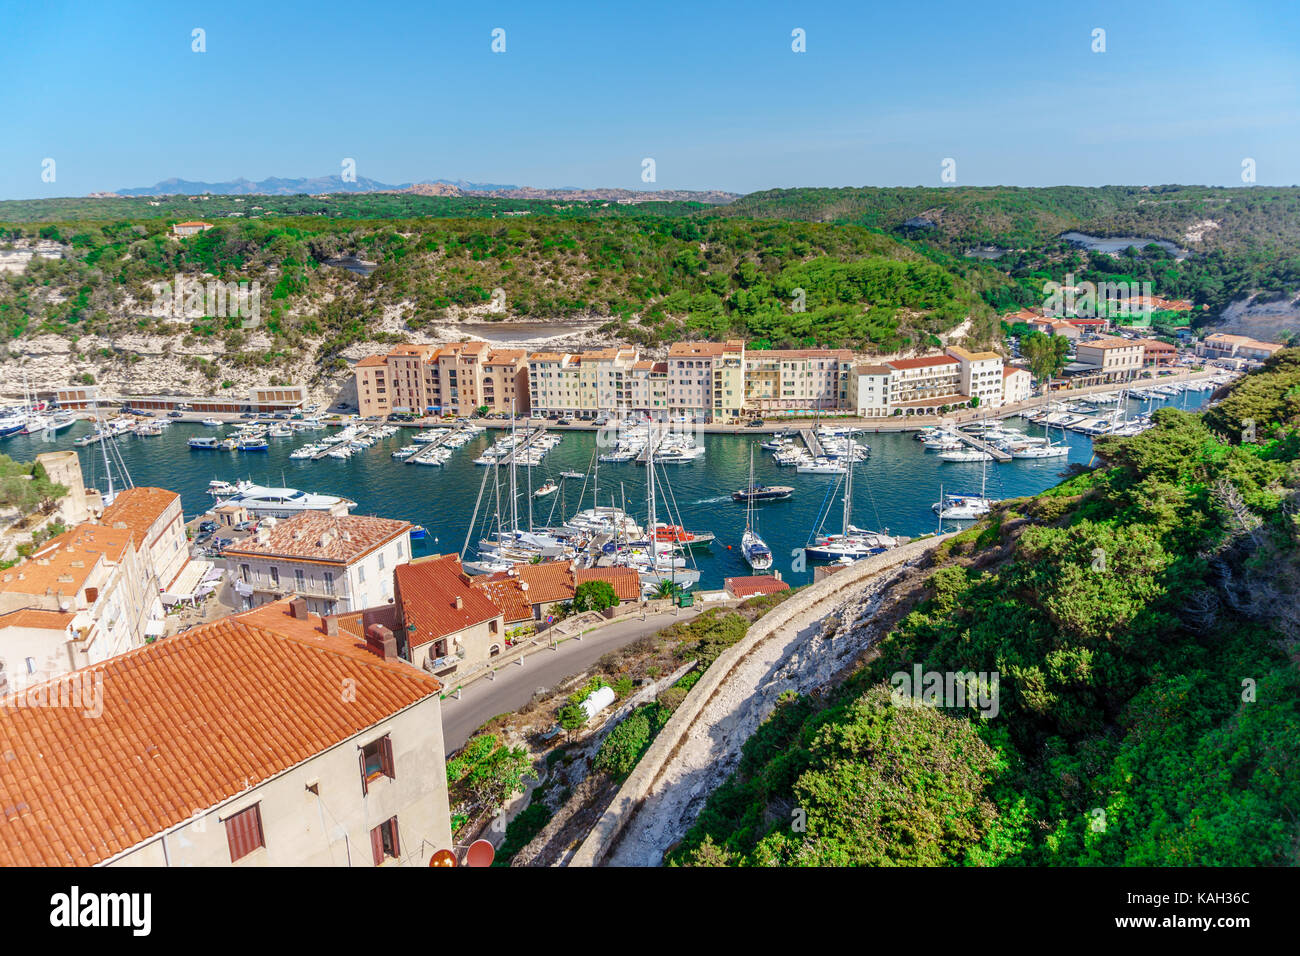 A view of Bonifacio port and old town Stock Photo